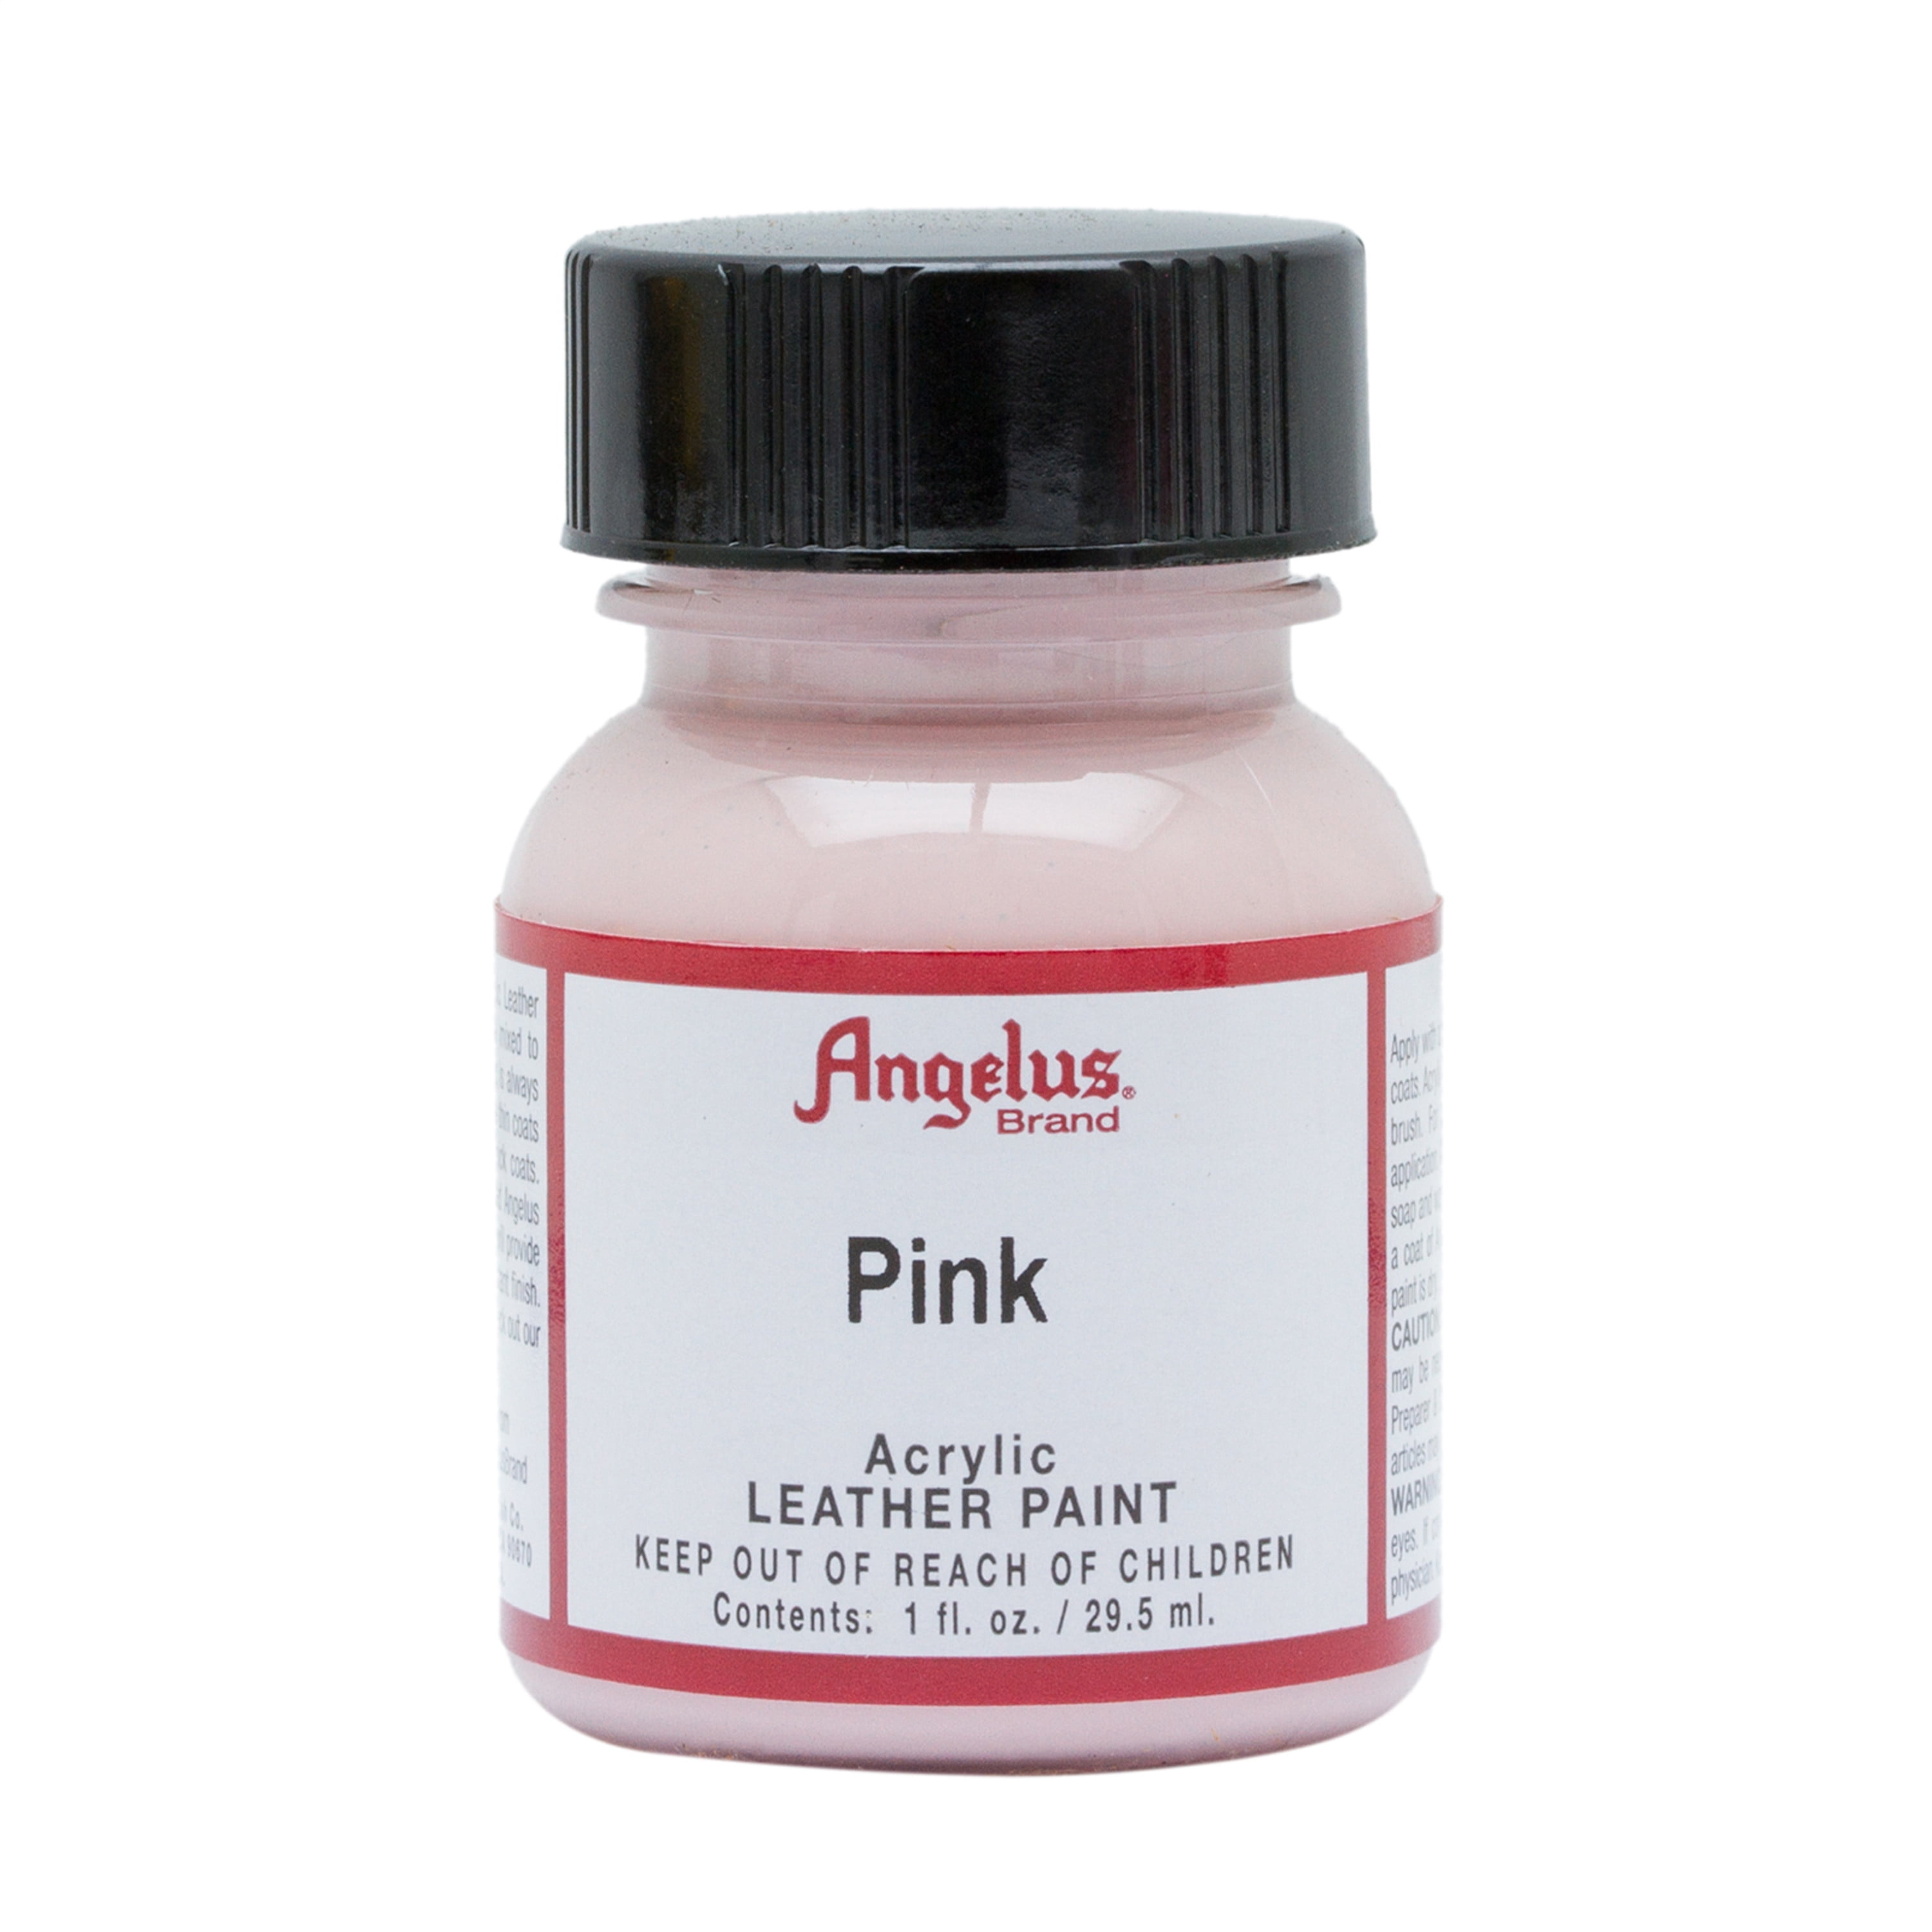 Angelus Leather Paint Pink